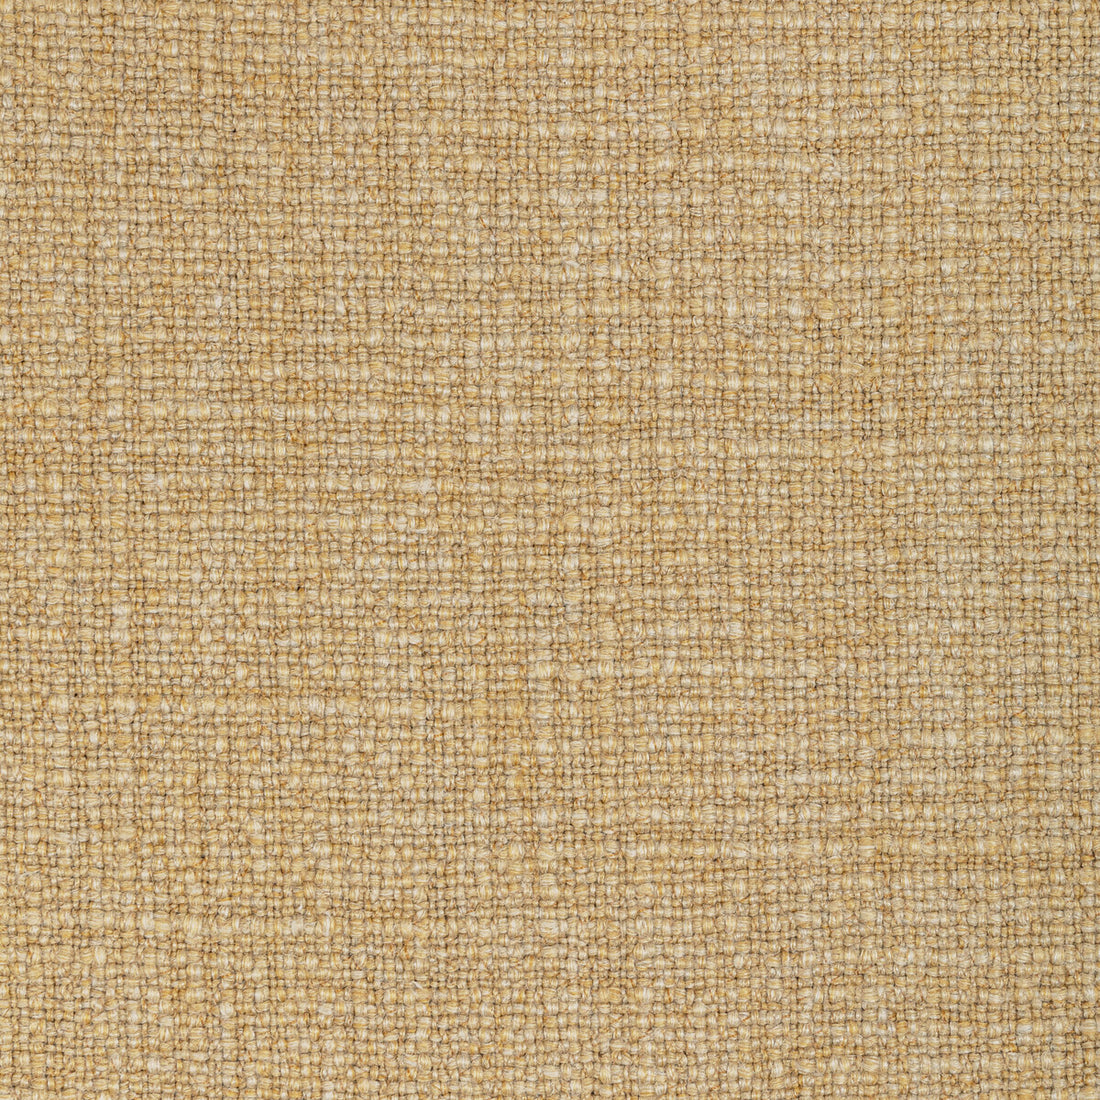 Ventureno fabric in gold coast color - pattern 36383.416.0 - by Kravet Couture in the Barbara Barry Ojai collection